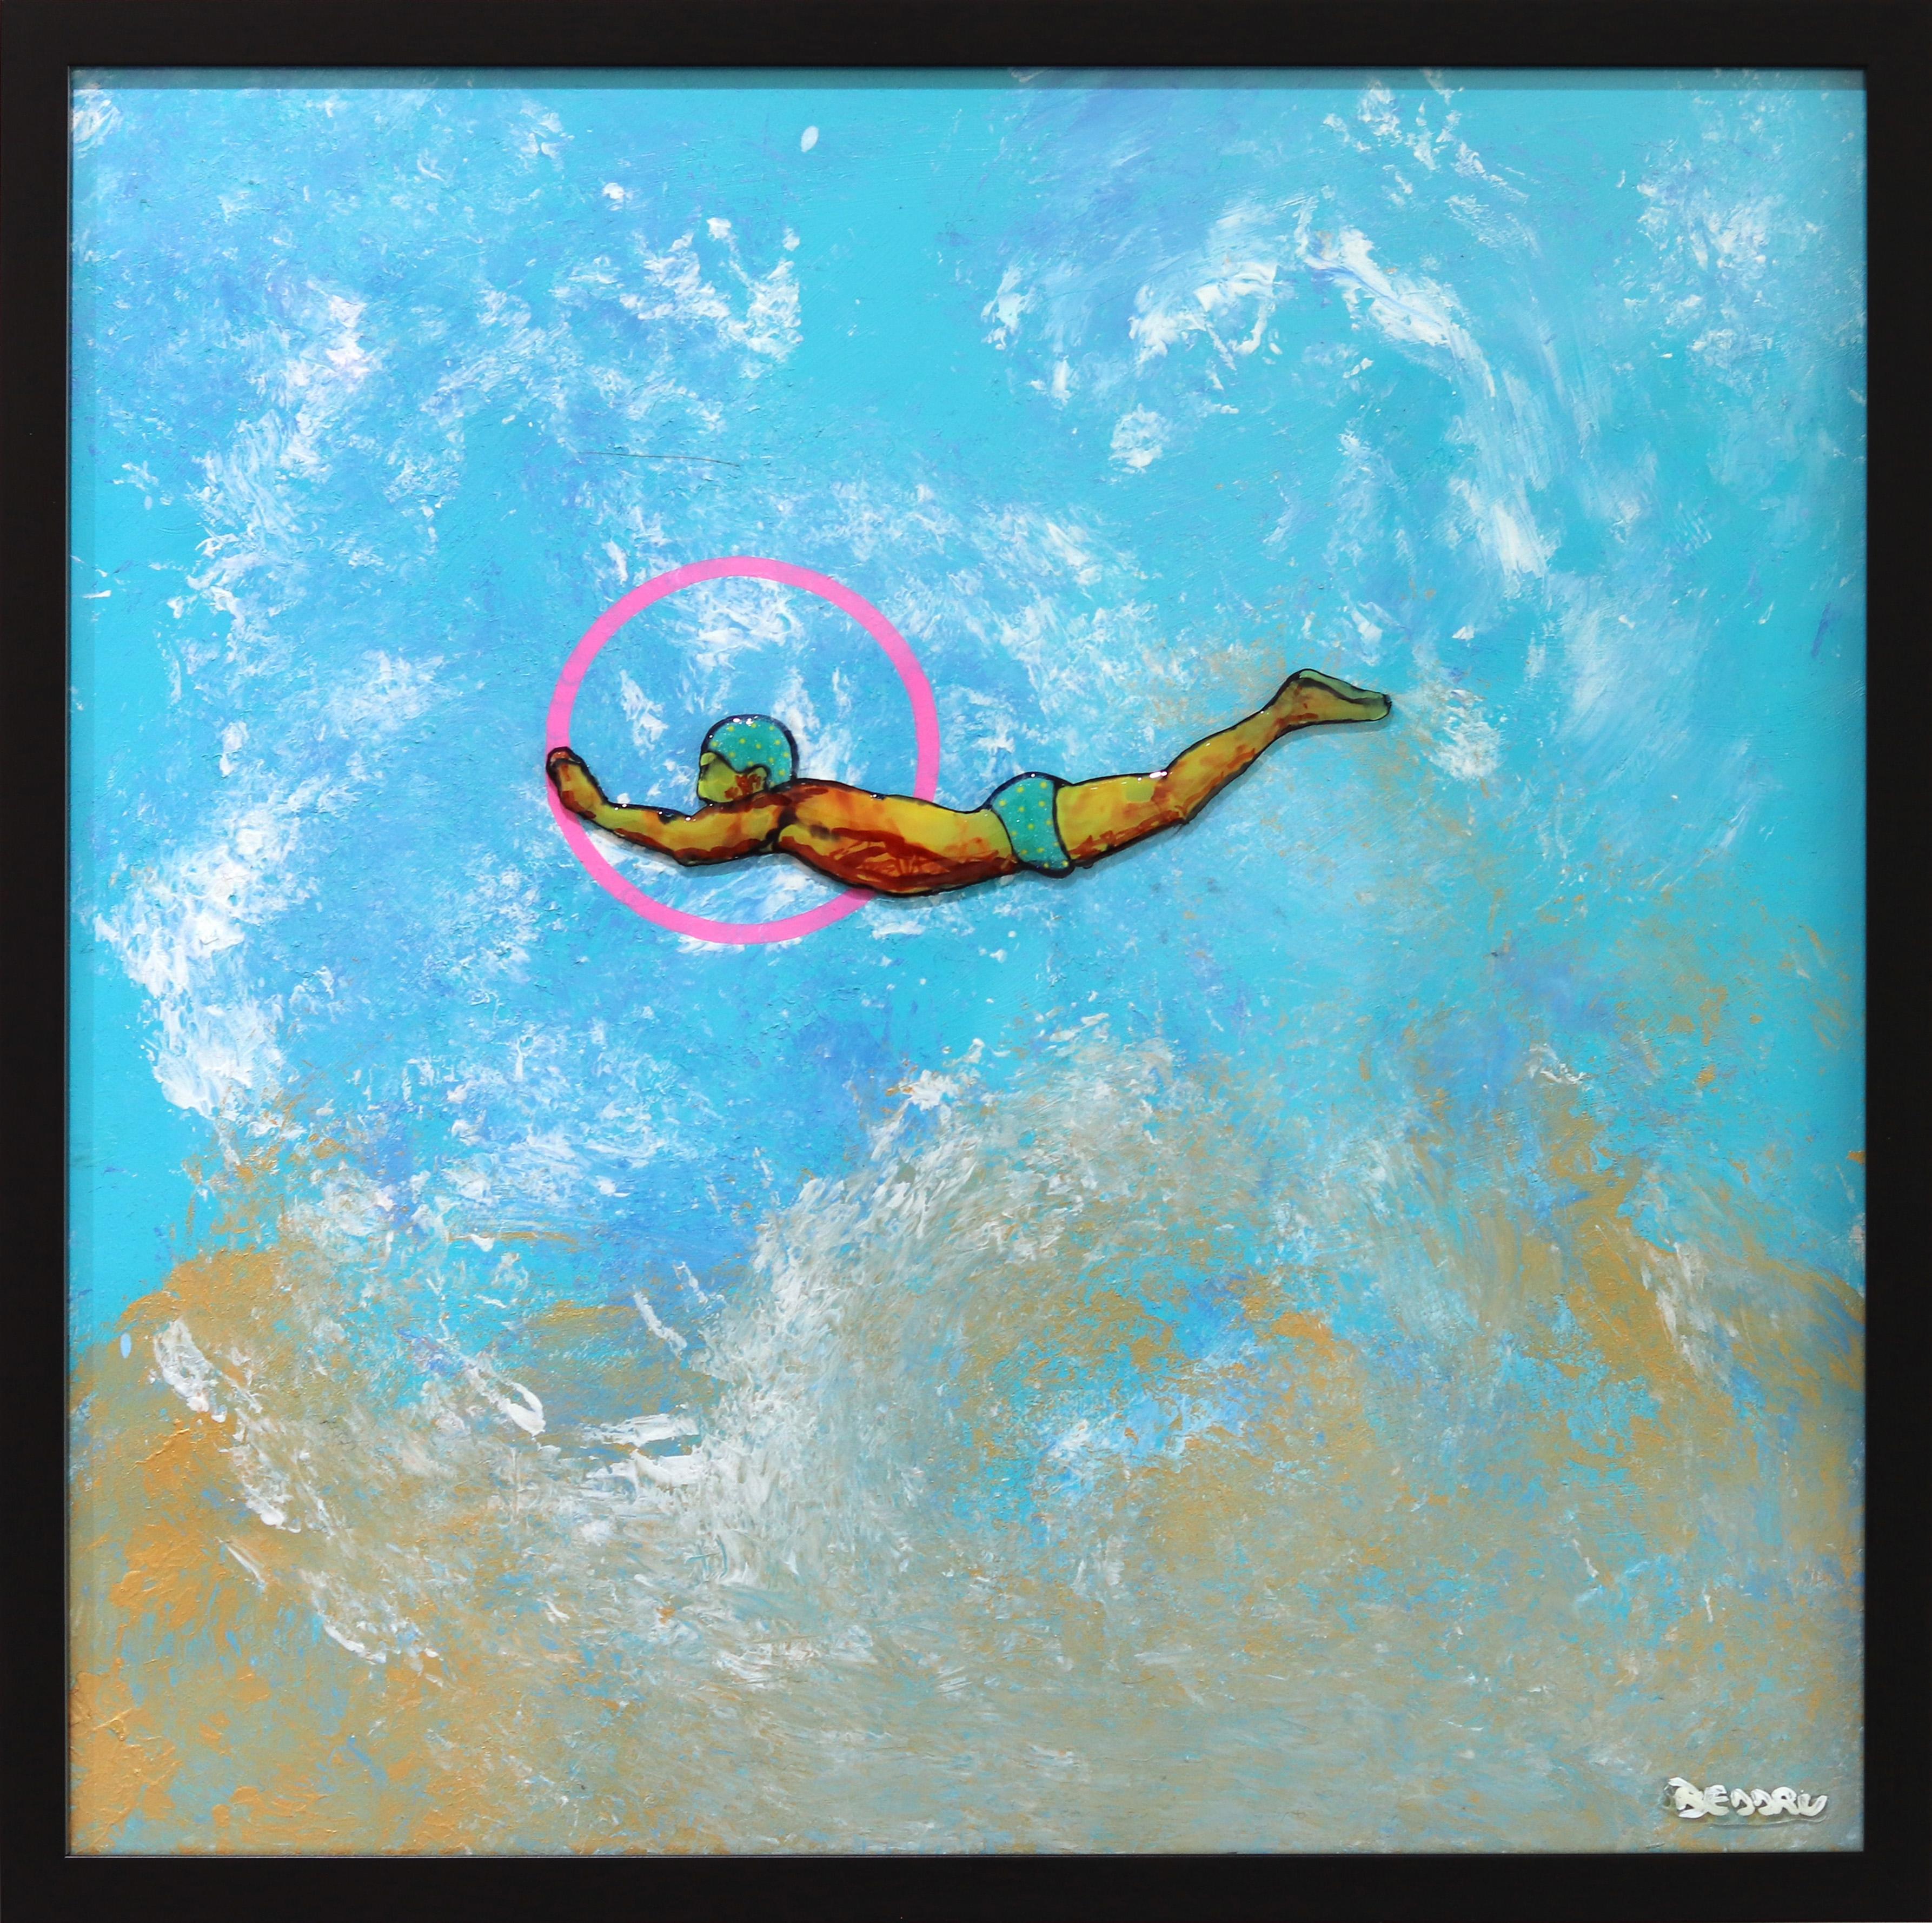 Giuseppe Beddru Figurative Painting - The Young Diver - Ocean Inspired Painting